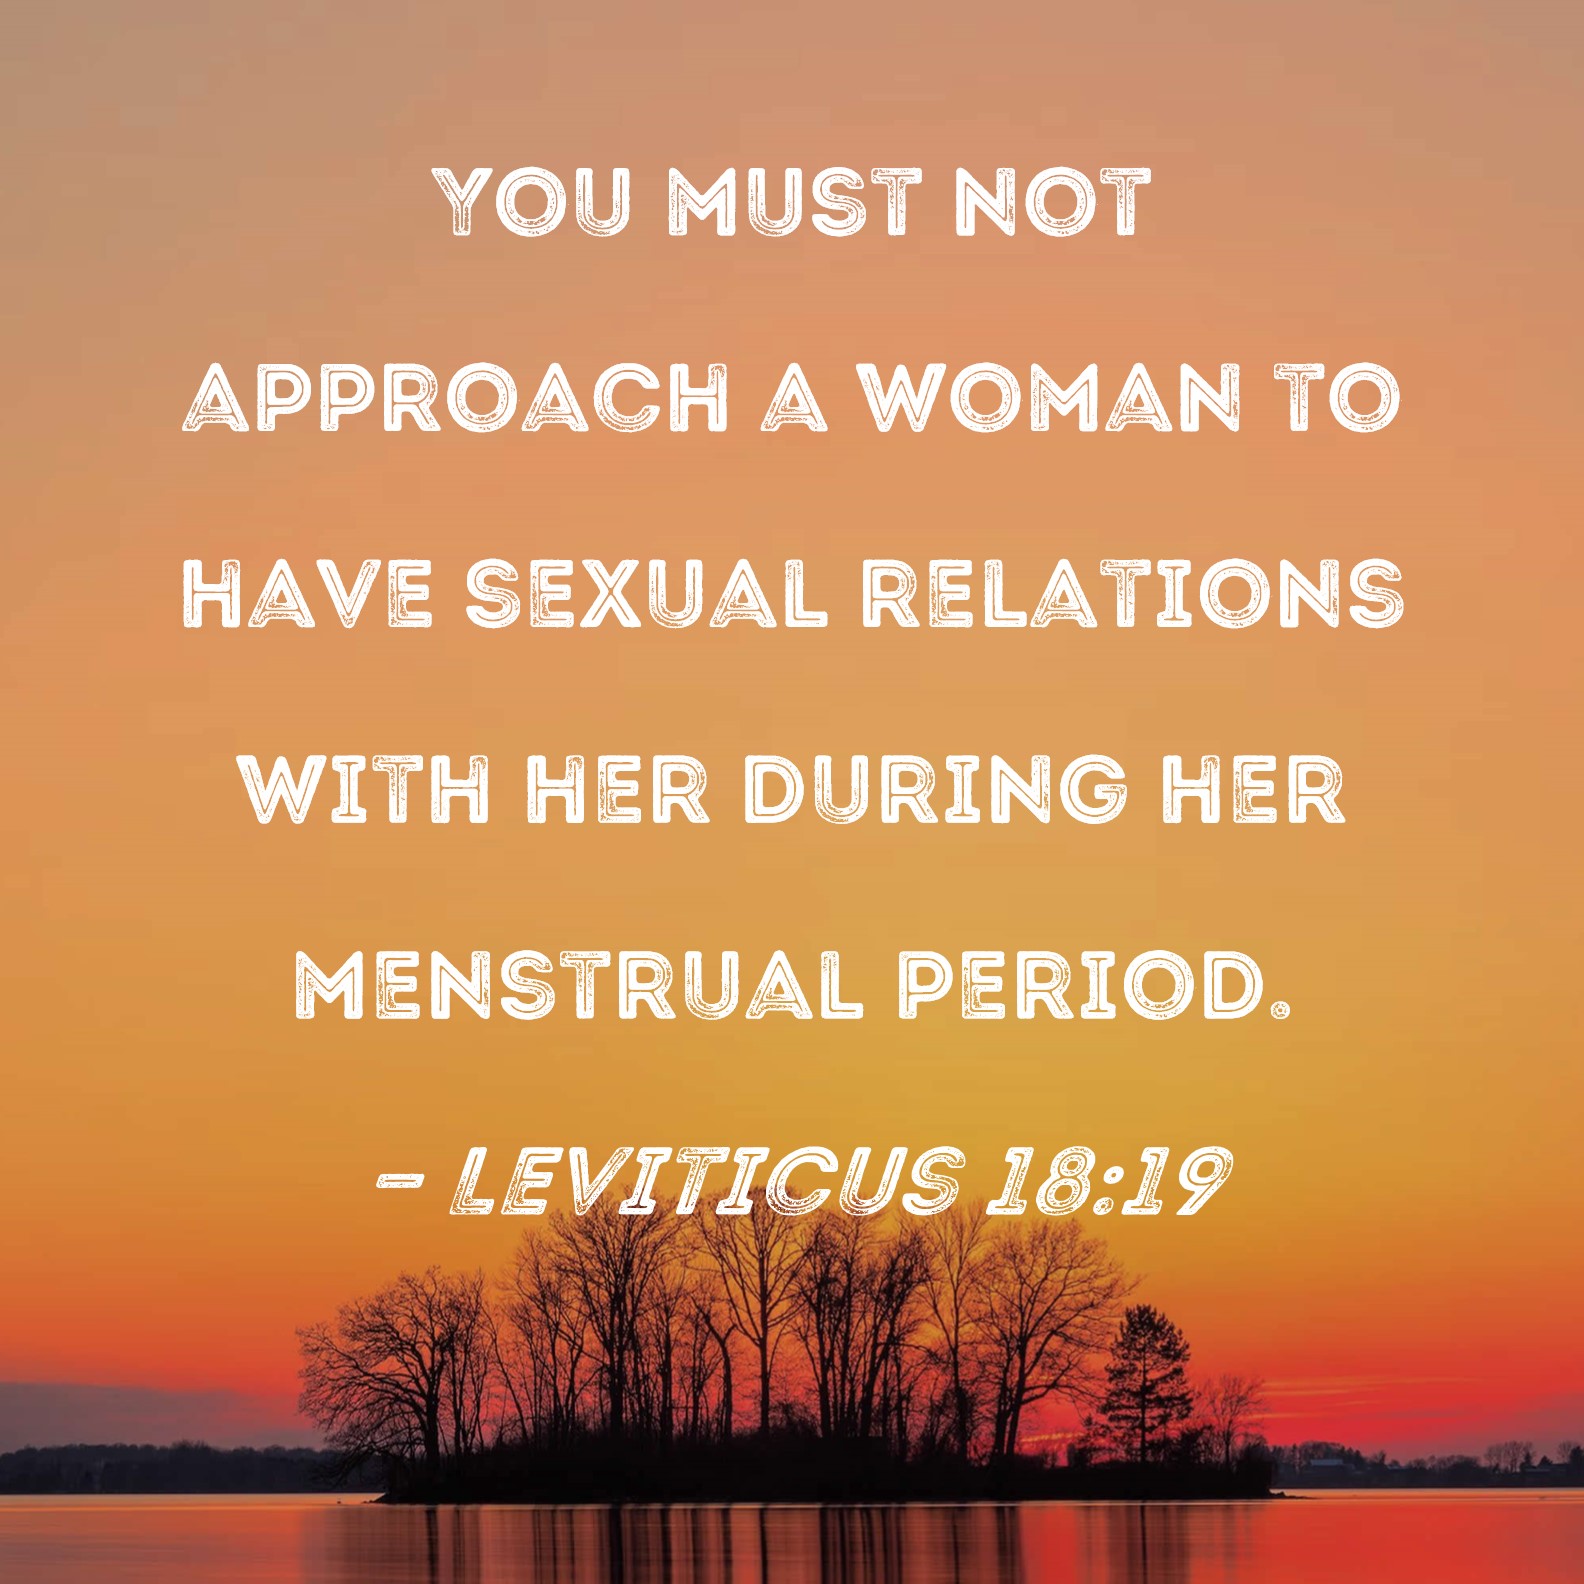 Leviticus 1819 You must not approach a woman to have sexual relations with her during her menstrual period. image